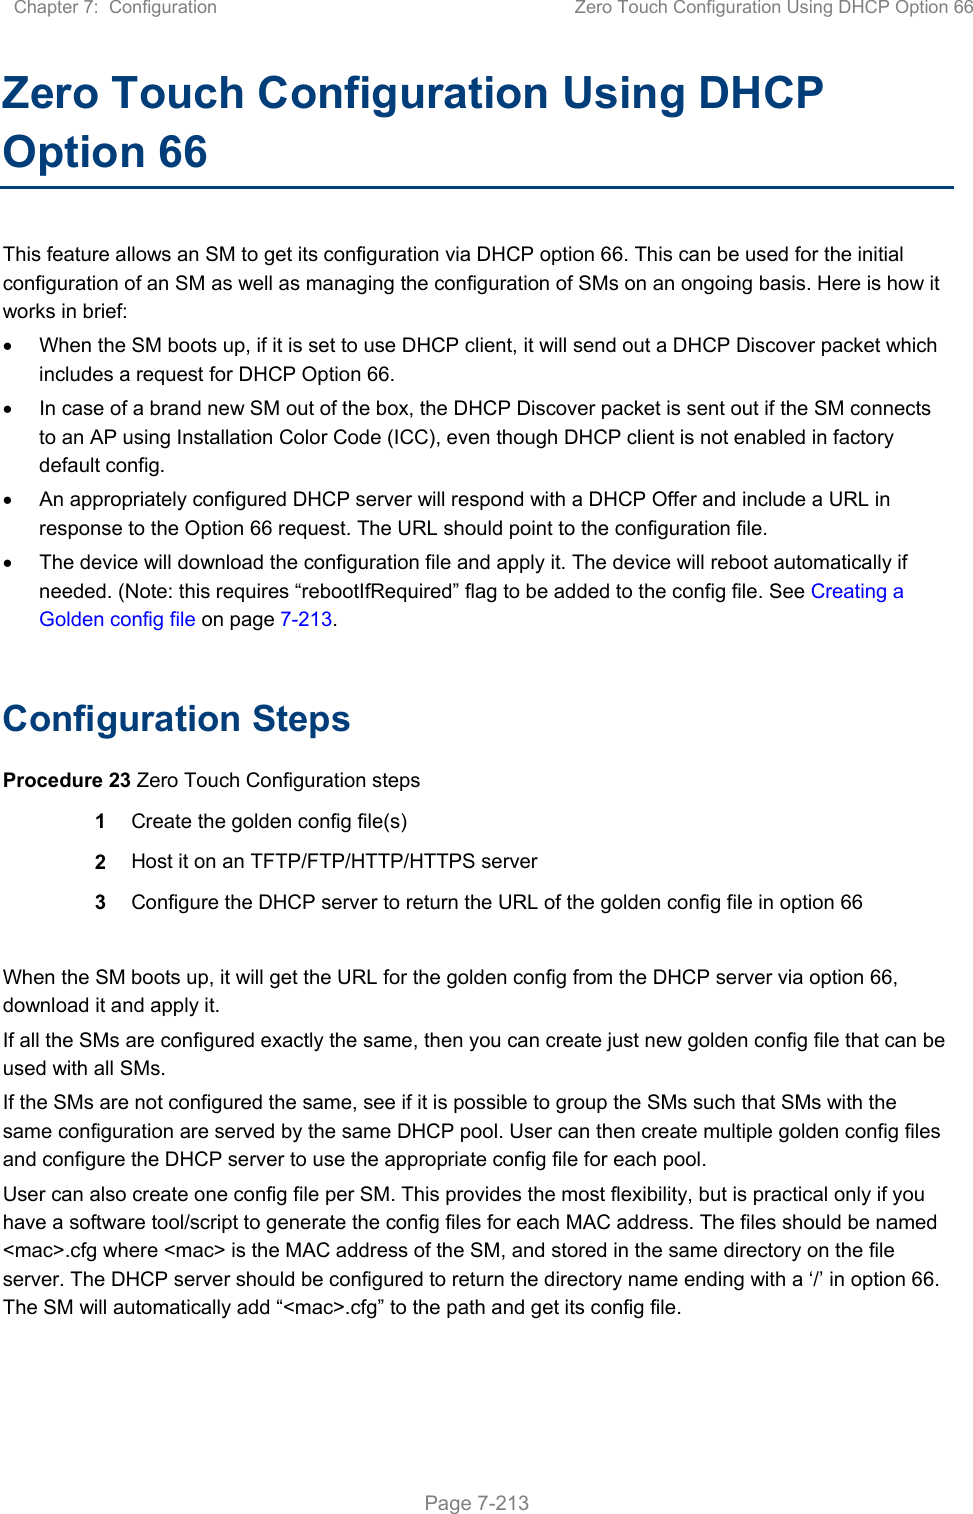 Chapter 7:  Configuration  Zero Touch Configuration Using DHCP Option 66   Page 7-213 Zero Touch Configuration Using DHCP Option 66 This feature allows an SM to get its configuration via DHCP option 66. This can be used for the initial configuration of an SM as well as managing the configuration of SMs on an ongoing basis. Here is how it works in brief:   When the SM boots up, if it is set to use DHCP client, it will send out a DHCP Discover packet which includes a request for DHCP Option 66.   In case of a brand new SM out of the box, the DHCP Discover packet is sent out if the SM connects to an AP using Installation Color Code (ICC), even though DHCP client is not enabled in factory default config.    An appropriately configured DHCP server will respond with a DHCP Offer and include a URL in response to the Option 66 request. The URL should point to the configuration file.   The device will download the configuration file and apply it. The device will reboot automatically if needed. (Note: this requires “rebootIfRequired” flag to be added to the config file. See Creating a Golden config file on page 7-213.  Configuration Steps Procedure 23 Zero Touch Configuration steps 1  Create the golden config file(s) 2  Host it on an TFTP/FTP/HTTP/HTTPS server 3  Configure the DHCP server to return the URL of the golden config file in option 66  When the SM boots up, it will get the URL for the golden config from the DHCP server via option 66, download it and apply it. If all the SMs are configured exactly the same, then you can create just new golden config file that can be used with all SMs.  If the SMs are not configured the same, see if it is possible to group the SMs such that SMs with the same configuration are served by the same DHCP pool. User can then create multiple golden config files and configure the DHCP server to use the appropriate config file for each pool. User can also create one config file per SM. This provides the most flexibility, but is practical only if you have a software tool/script to generate the config files for each MAC address. The files should be named &lt;mac&gt;.cfg where &lt;mac&gt; is the MAC address of the SM, and stored in the same directory on the file server. The DHCP server should be configured to return the directory name ending with a ‘/’ in option 66. The SM will automatically add “&lt;mac&gt;.cfg” to the path and get its config file. 